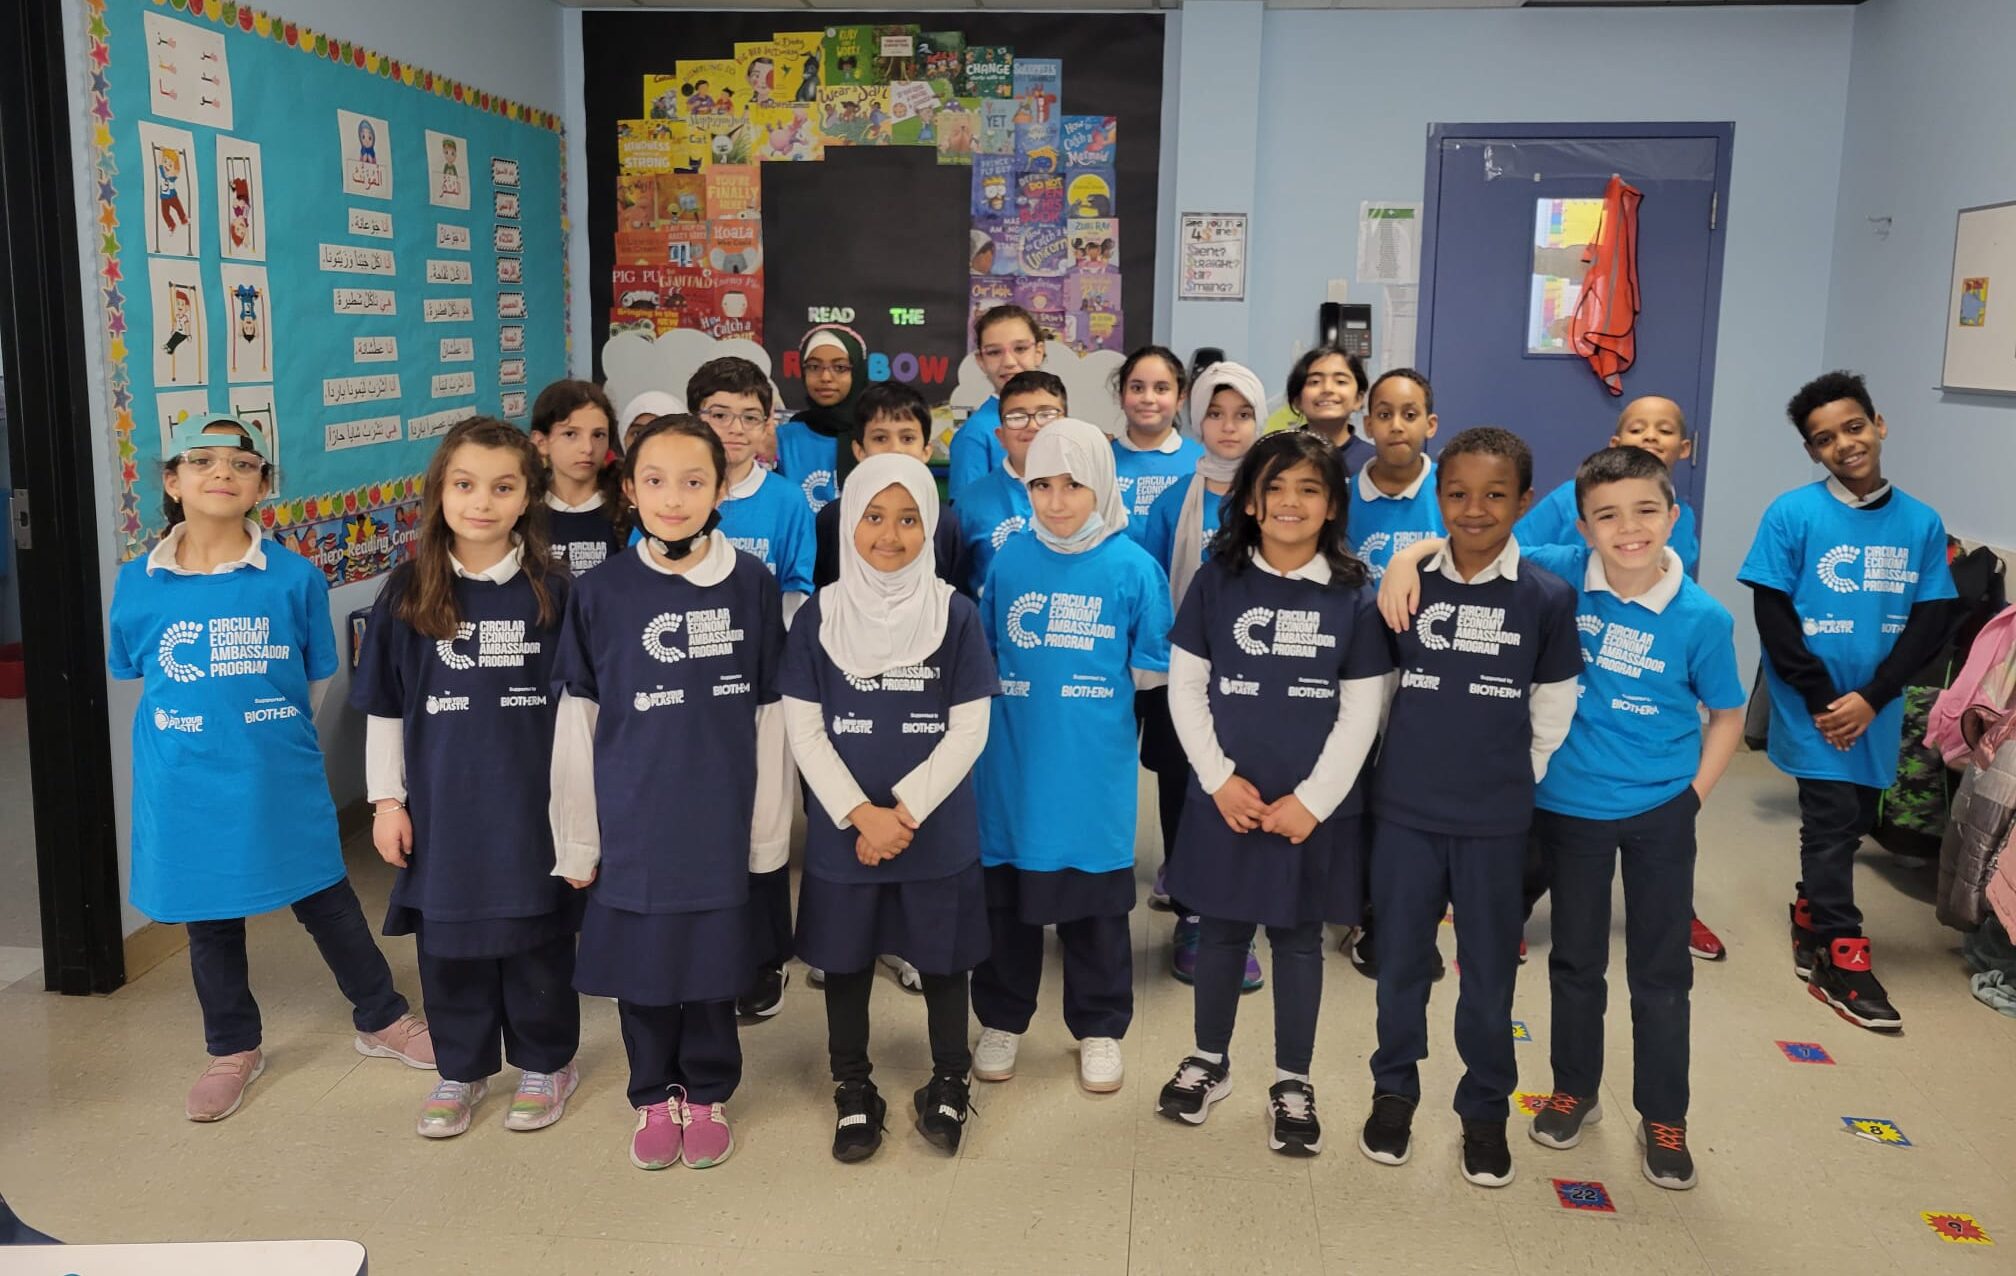 Children in blue shirts at Calgary Islamic School, engaged in MYP's Circular Economy Ambassador Program, standing in a classroom.